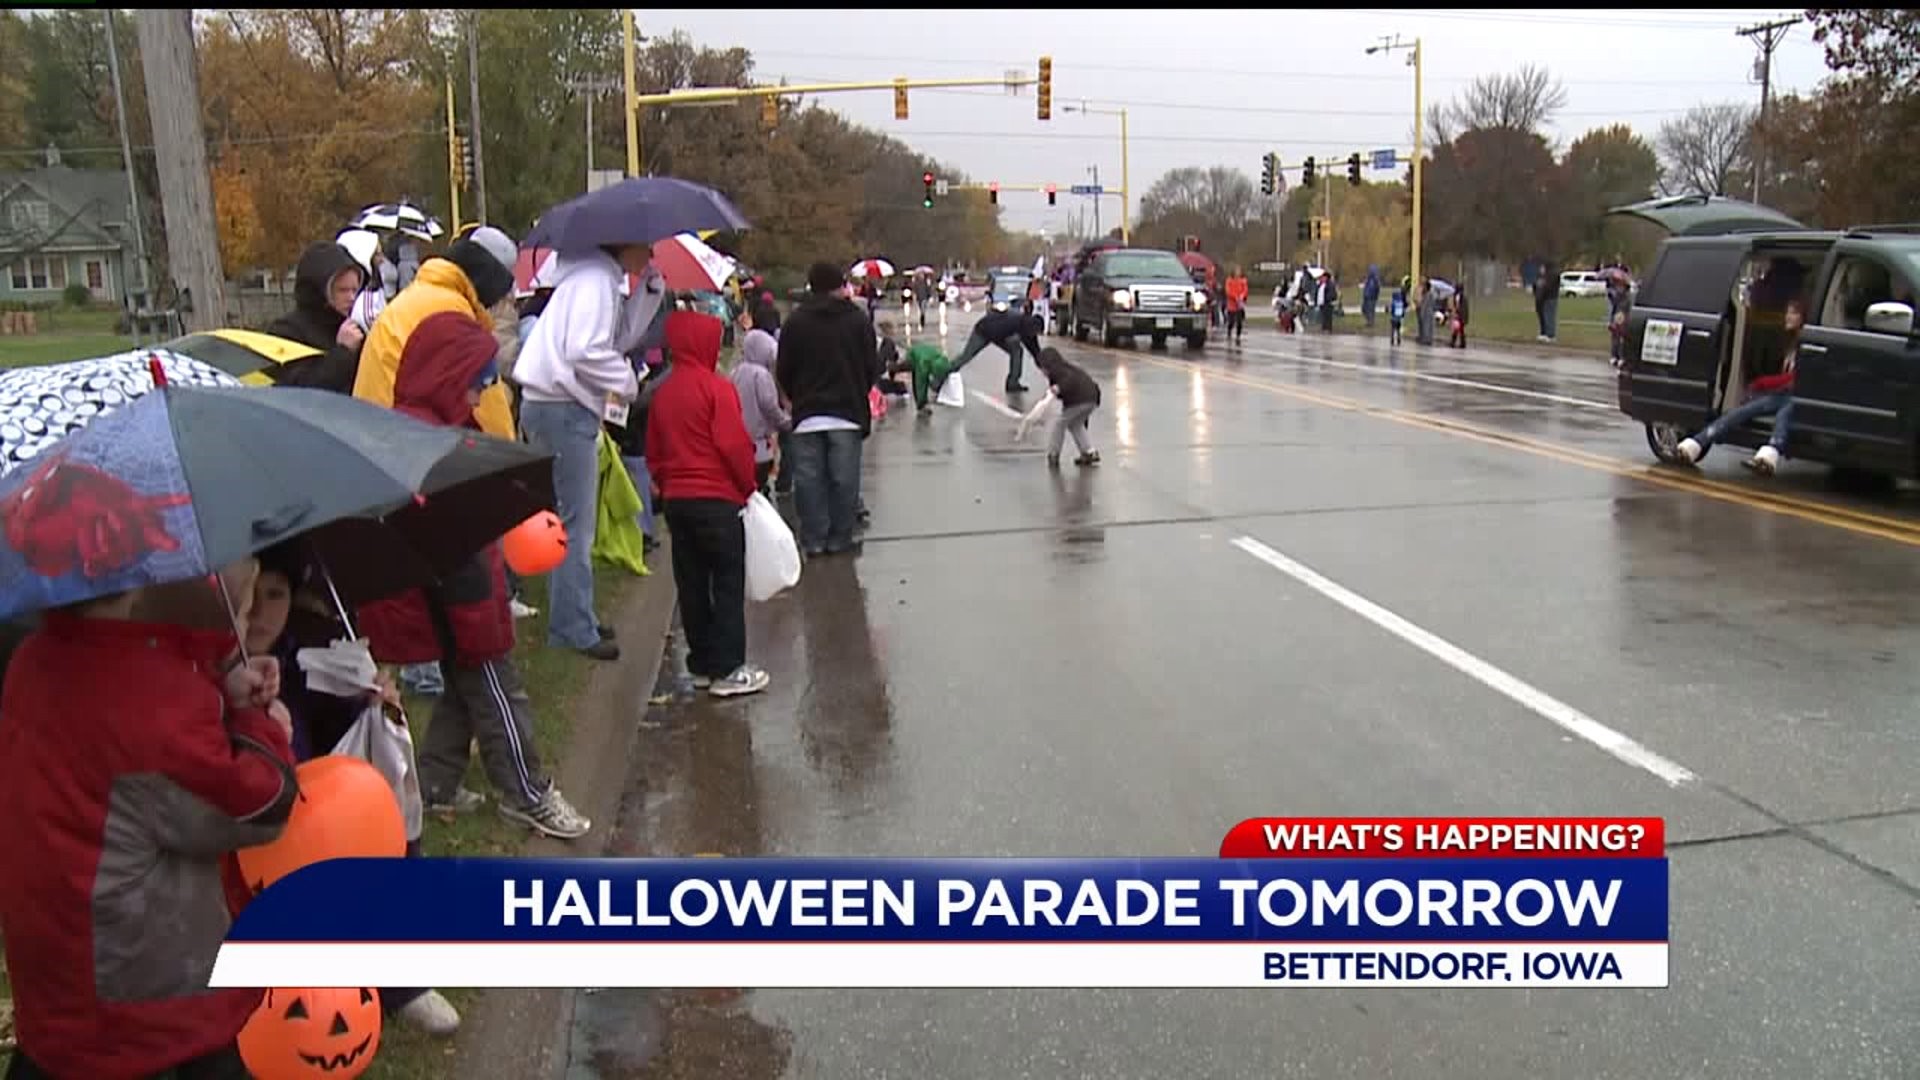 davenport halloween parade 2020 street closures Which Roads Will Be Closed For Davenport S Halloween Parade Wqad Com davenport halloween parade 2020 street closures